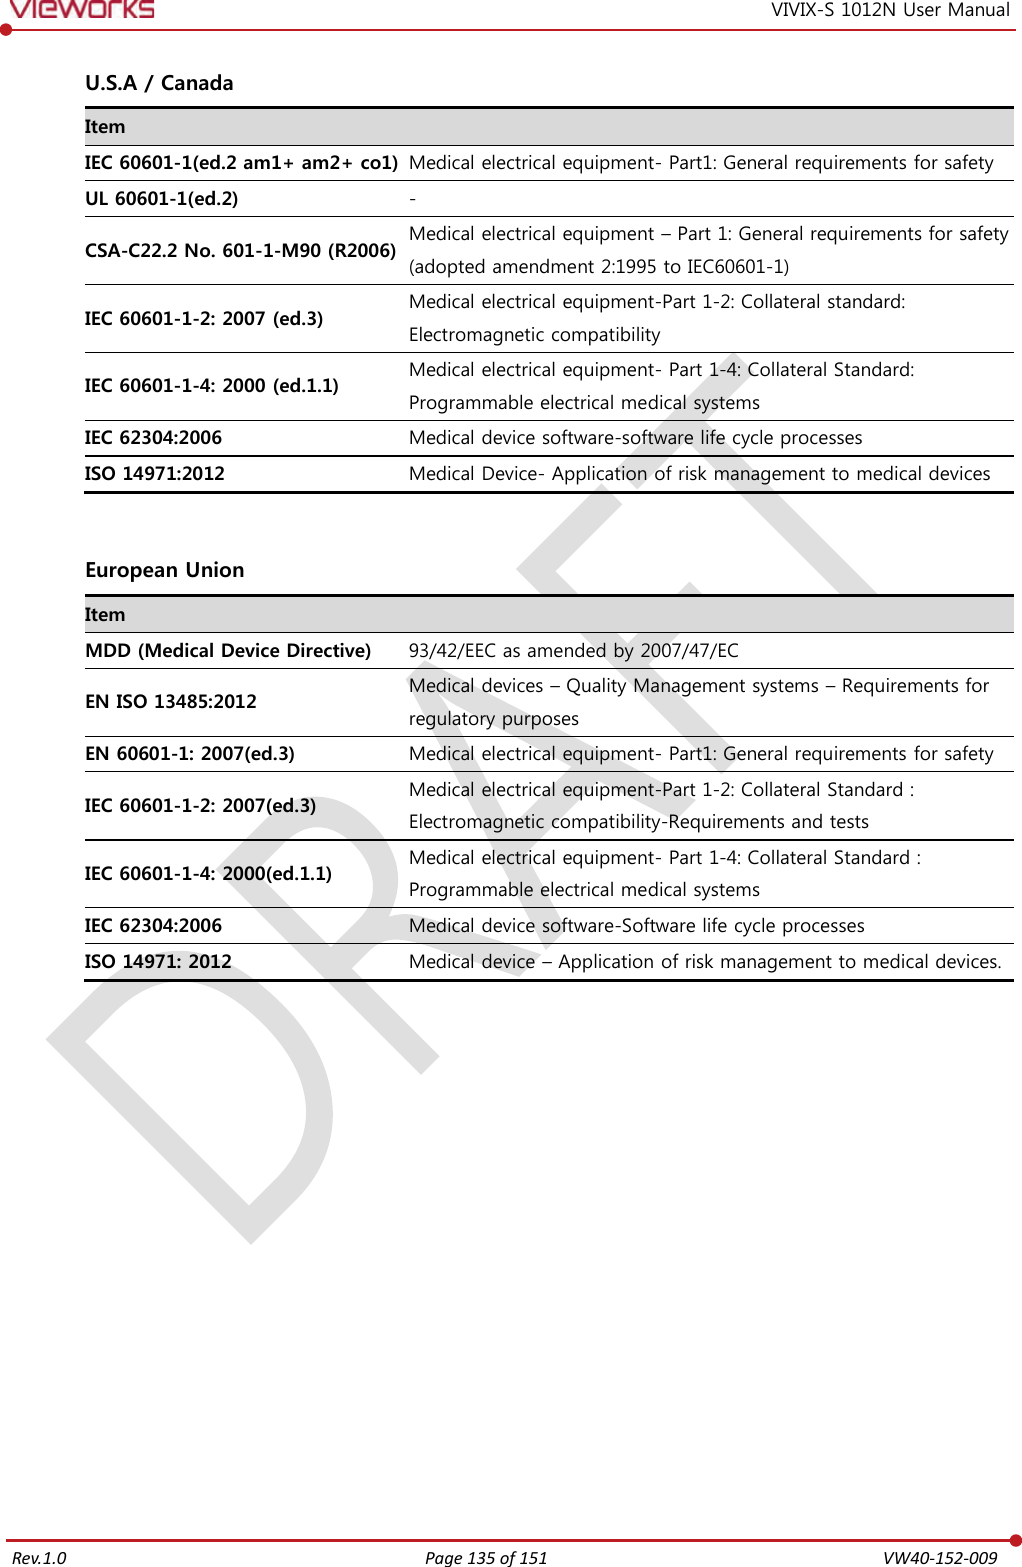   Rev.1.0 Page 135 of 151  VW40-152-009 VIVIX-S 1012N User Manual  U.S.A / Canada Item  IEC 60601-1(ed.2 am1+ am2+ co1) Medical electrical equipment- Part1: General requirements for safety UL 60601-1(ed.2) - CSA-C22.2 No. 601-1-M90 (R2006) Medical electrical equipment – Part 1: General requirements for safety (adopted amendment 2:1995 to IEC60601-1) IEC 60601-1-2: 2007 (ed.3) Medical electrical equipment-Part 1-2: Collateral standard: Electromagnetic compatibility IEC 60601-1-4: 2000 (ed.1.1) Medical electrical equipment- Part 1-4: Collateral Standard: Programmable electrical medical systems IEC 62304:2006 Medical device software-software life cycle processes ISO 14971:2012 Medical Device- Application of risk management to medical devices   European Union Item  MDD (Medical Device Directive) 93/42/EEC as amended by 2007/47/EC EN ISO 13485:2012 Medical devices – Quality Management systems – Requirements for regulatory purposes EN 60601-1: 2007(ed.3) Medical electrical equipment- Part1: General requirements for safety IEC 60601-1-2: 2007(ed.3) Medical electrical equipment-Part 1-2: Collateral Standard : Electromagnetic compatibility-Requirements and tests IEC 60601-1-4: 2000(ed.1.1) Medical electrical equipment- Part 1-4: Collateral Standard : Programmable electrical medical systems IEC 62304:2006 Medical device software-Software life cycle processes ISO 14971: 2012 Medical device – Application of risk management to medical devices.   